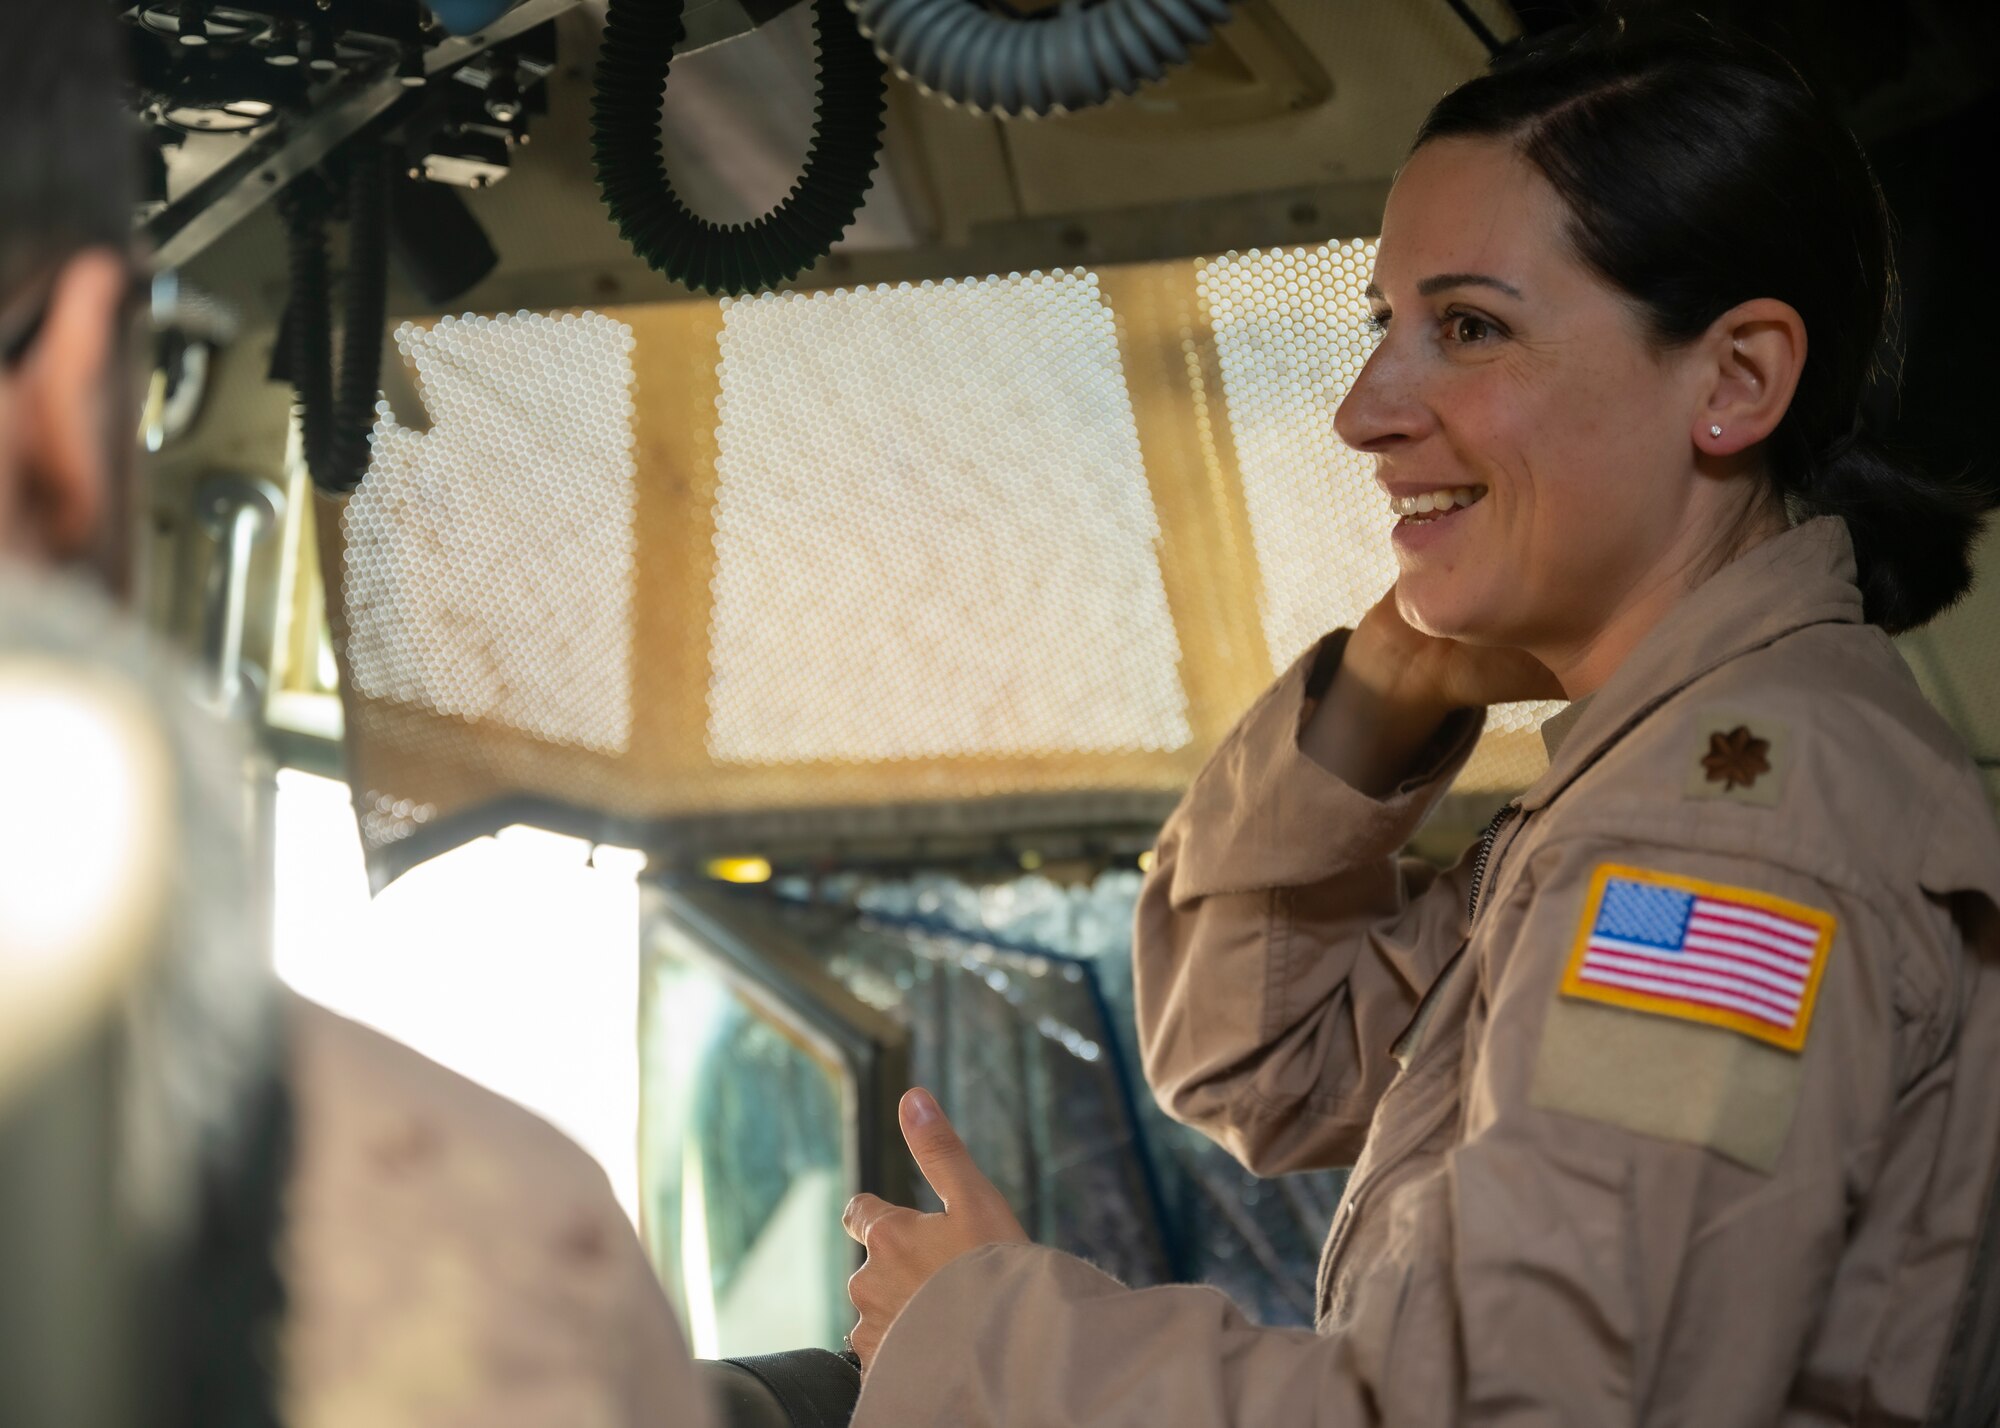 U.S. Air Force Maj. Natalie Marshall, a pilot assigned to the 779th Expeditionary Airlift Squadron, interacts with visitors during a C-130H Hercules tour at Ali Al Salem Air Base, Kuwait, Oct. 9, 2021.